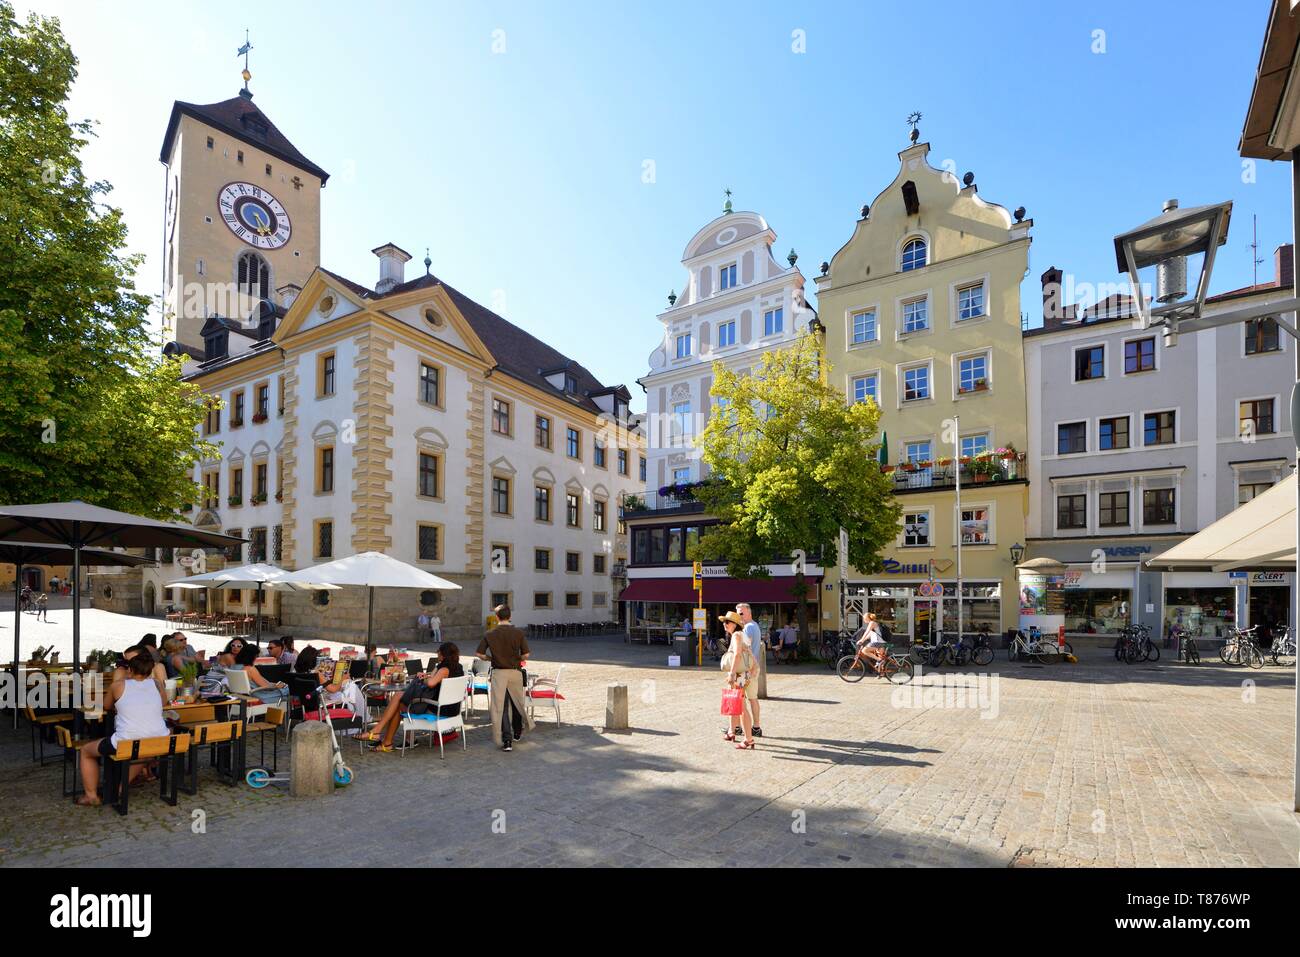 Germany, Bavaria, Upper Palatinate, Regensburg, historical center listed as World Heritage by UNESCO, Kohlenmarkt with the old town hall with its tower Stock Photo